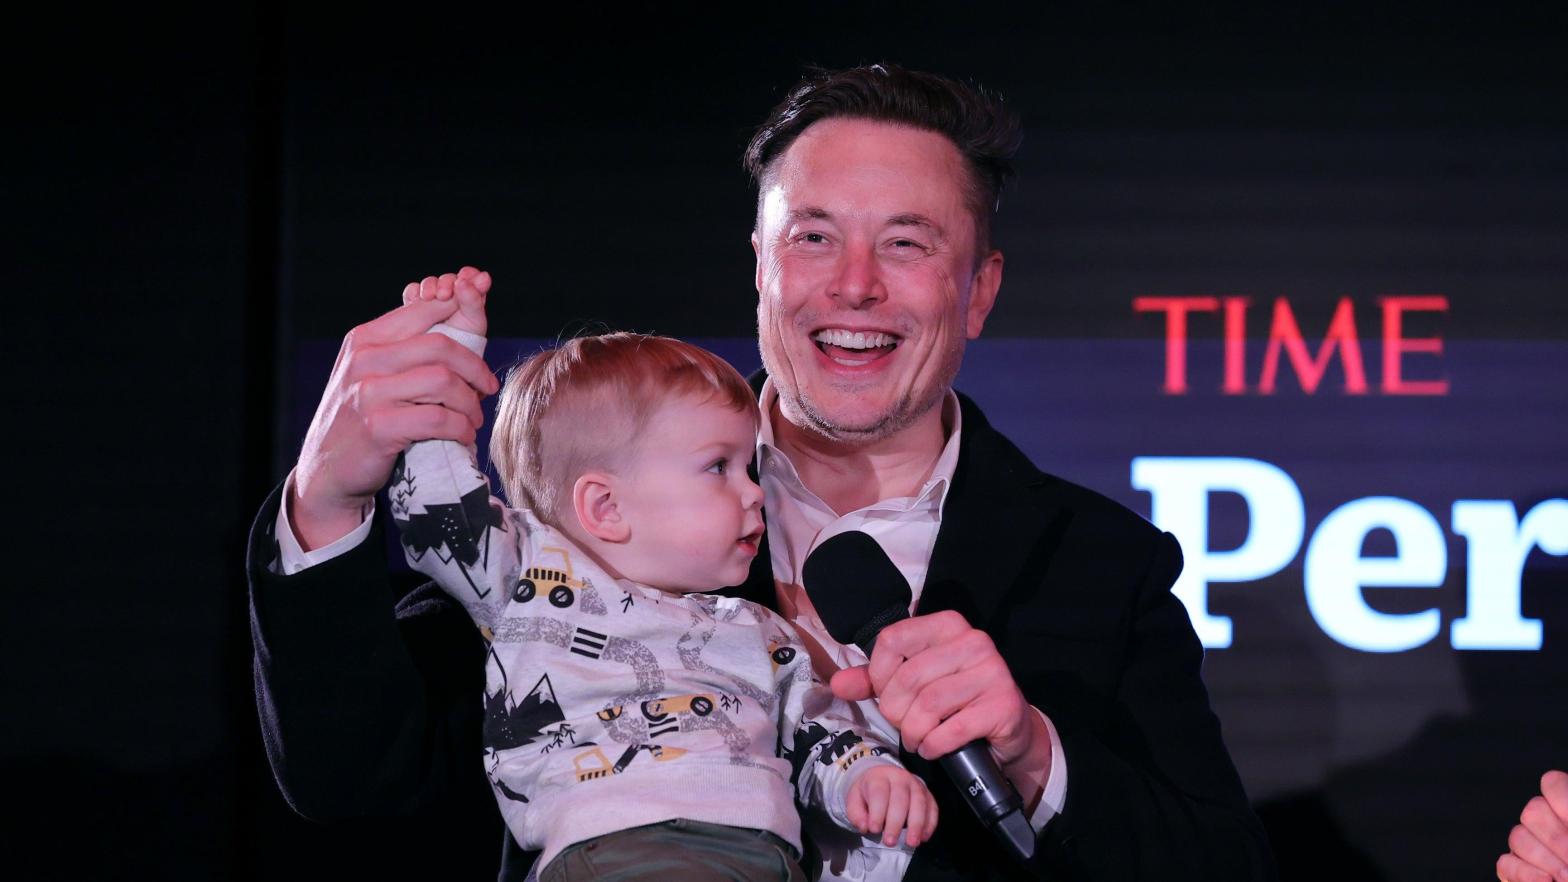 Elon Musk and son X Æ A-12 on stage TIME Person of the Year on December 13, 2021 in New York City.  (Photo: Theo Wargo, Getty Images)